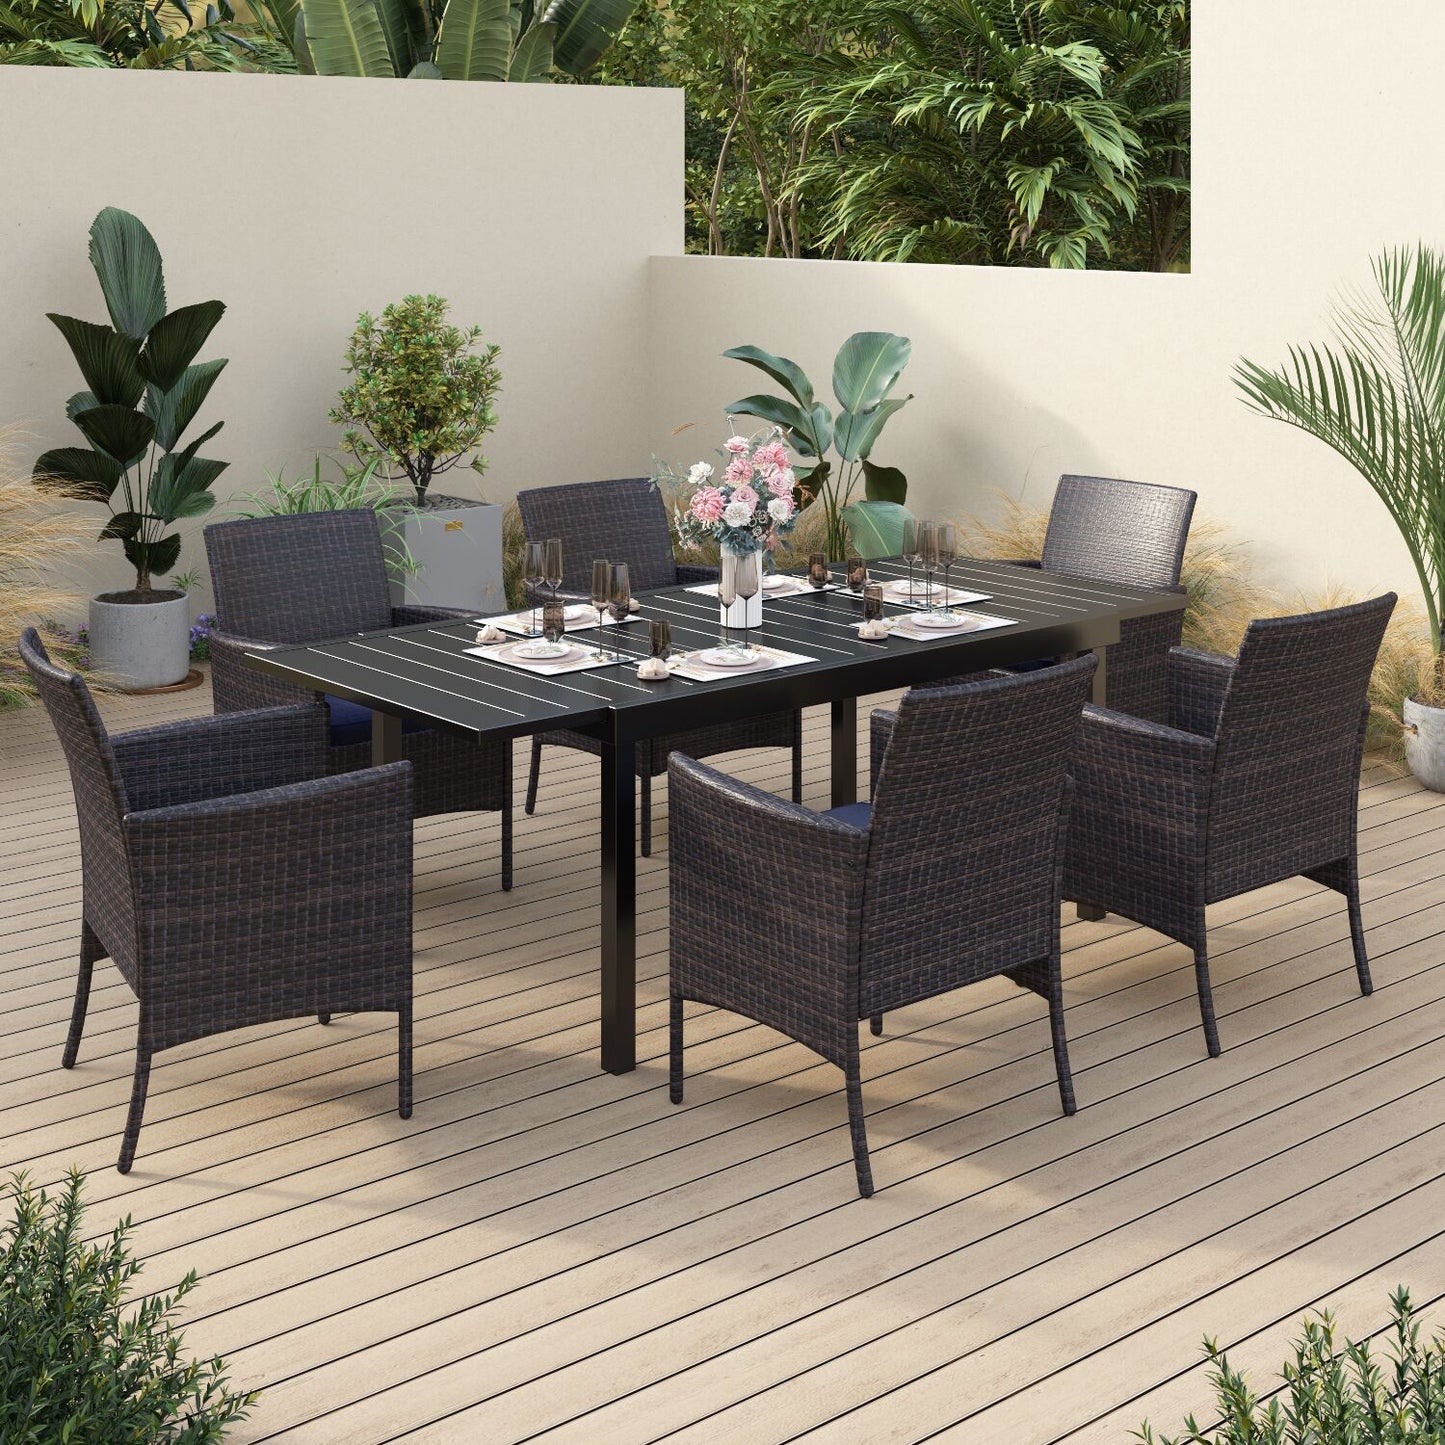 Sophia & William 7 Piece Outdoor Patio Dining Set Outdoor Furniture Set with 6 Rattan Dining Chairs and 1 Metal Expandable Dining Table